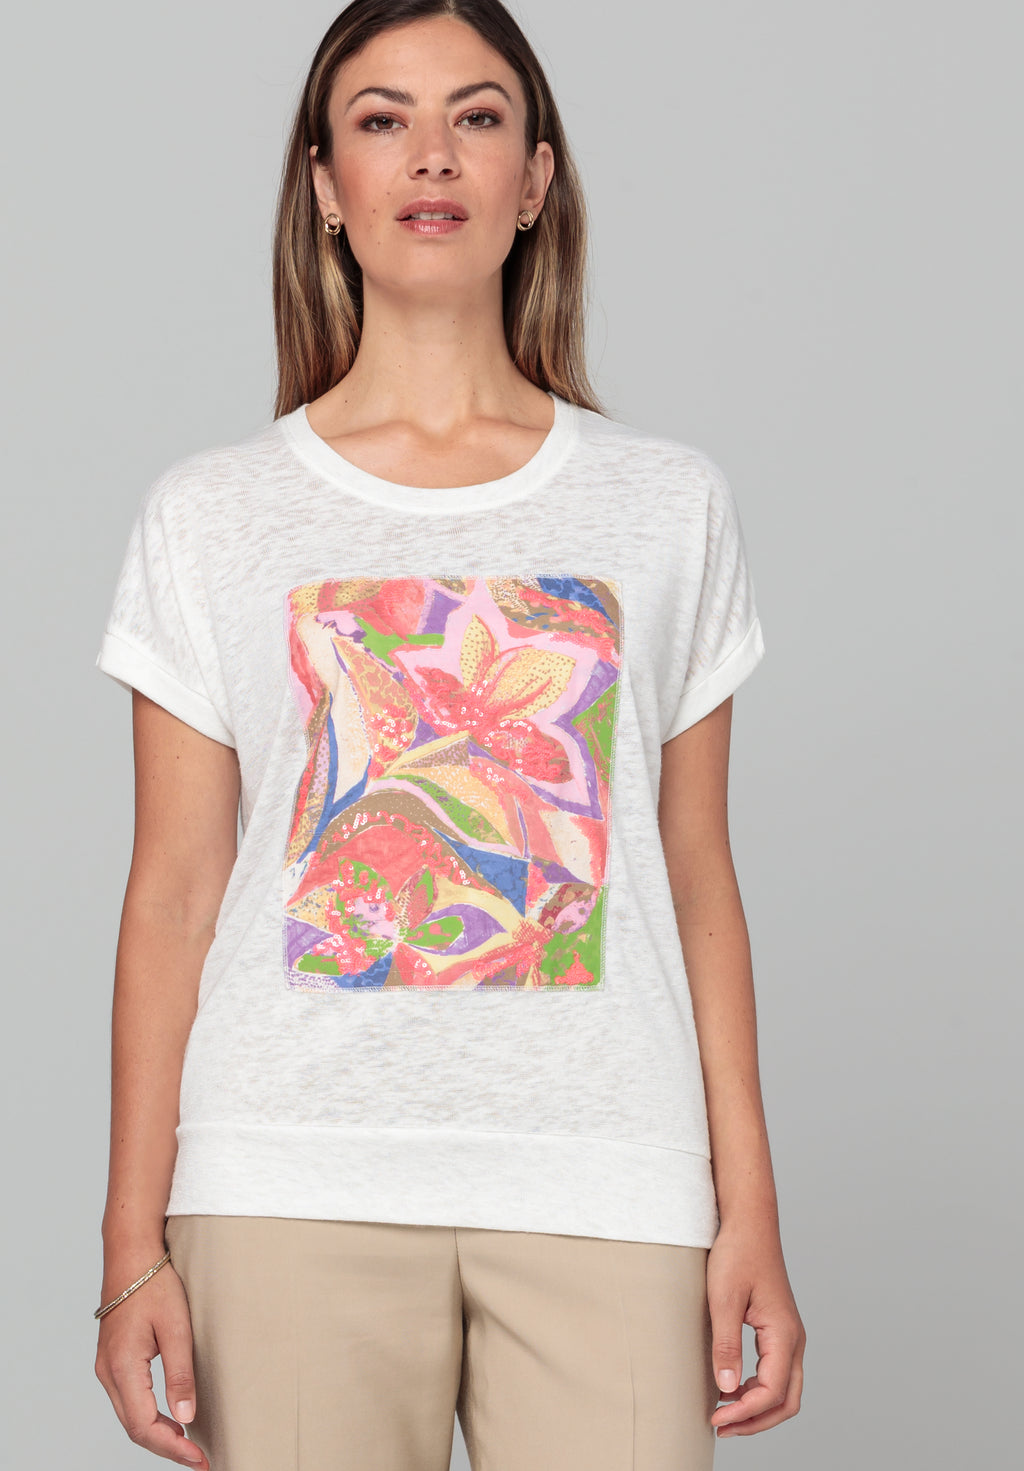 <p>Bianca Julie printed roundneck tshirt in white and coral</p>
<p>Product code 36246</p>